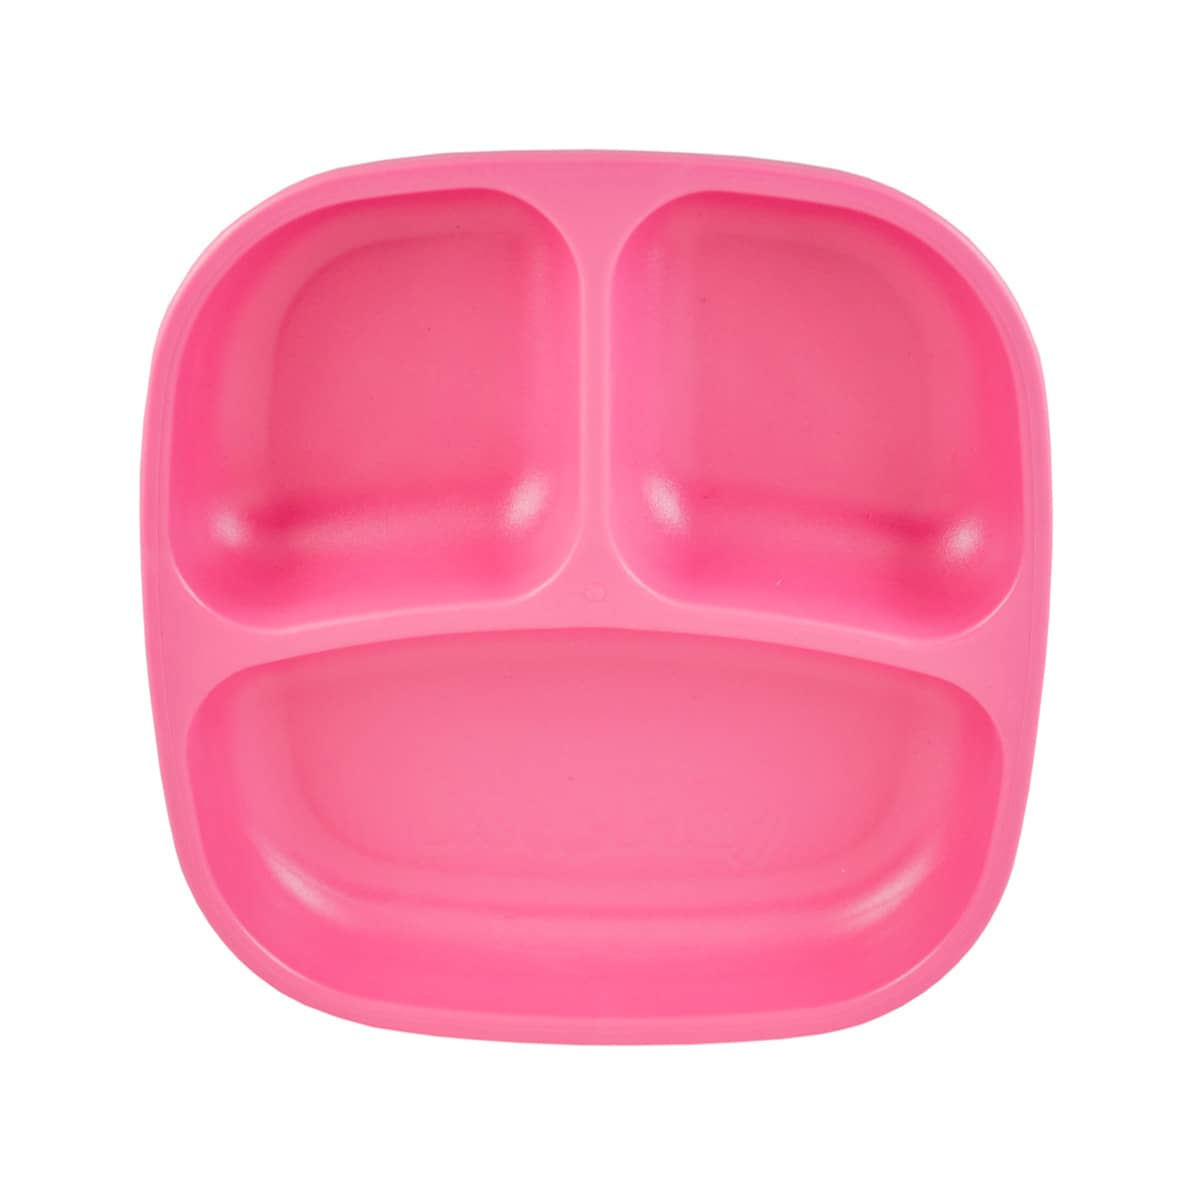 Re-Play Recycled Divided Plate - Bright Pink